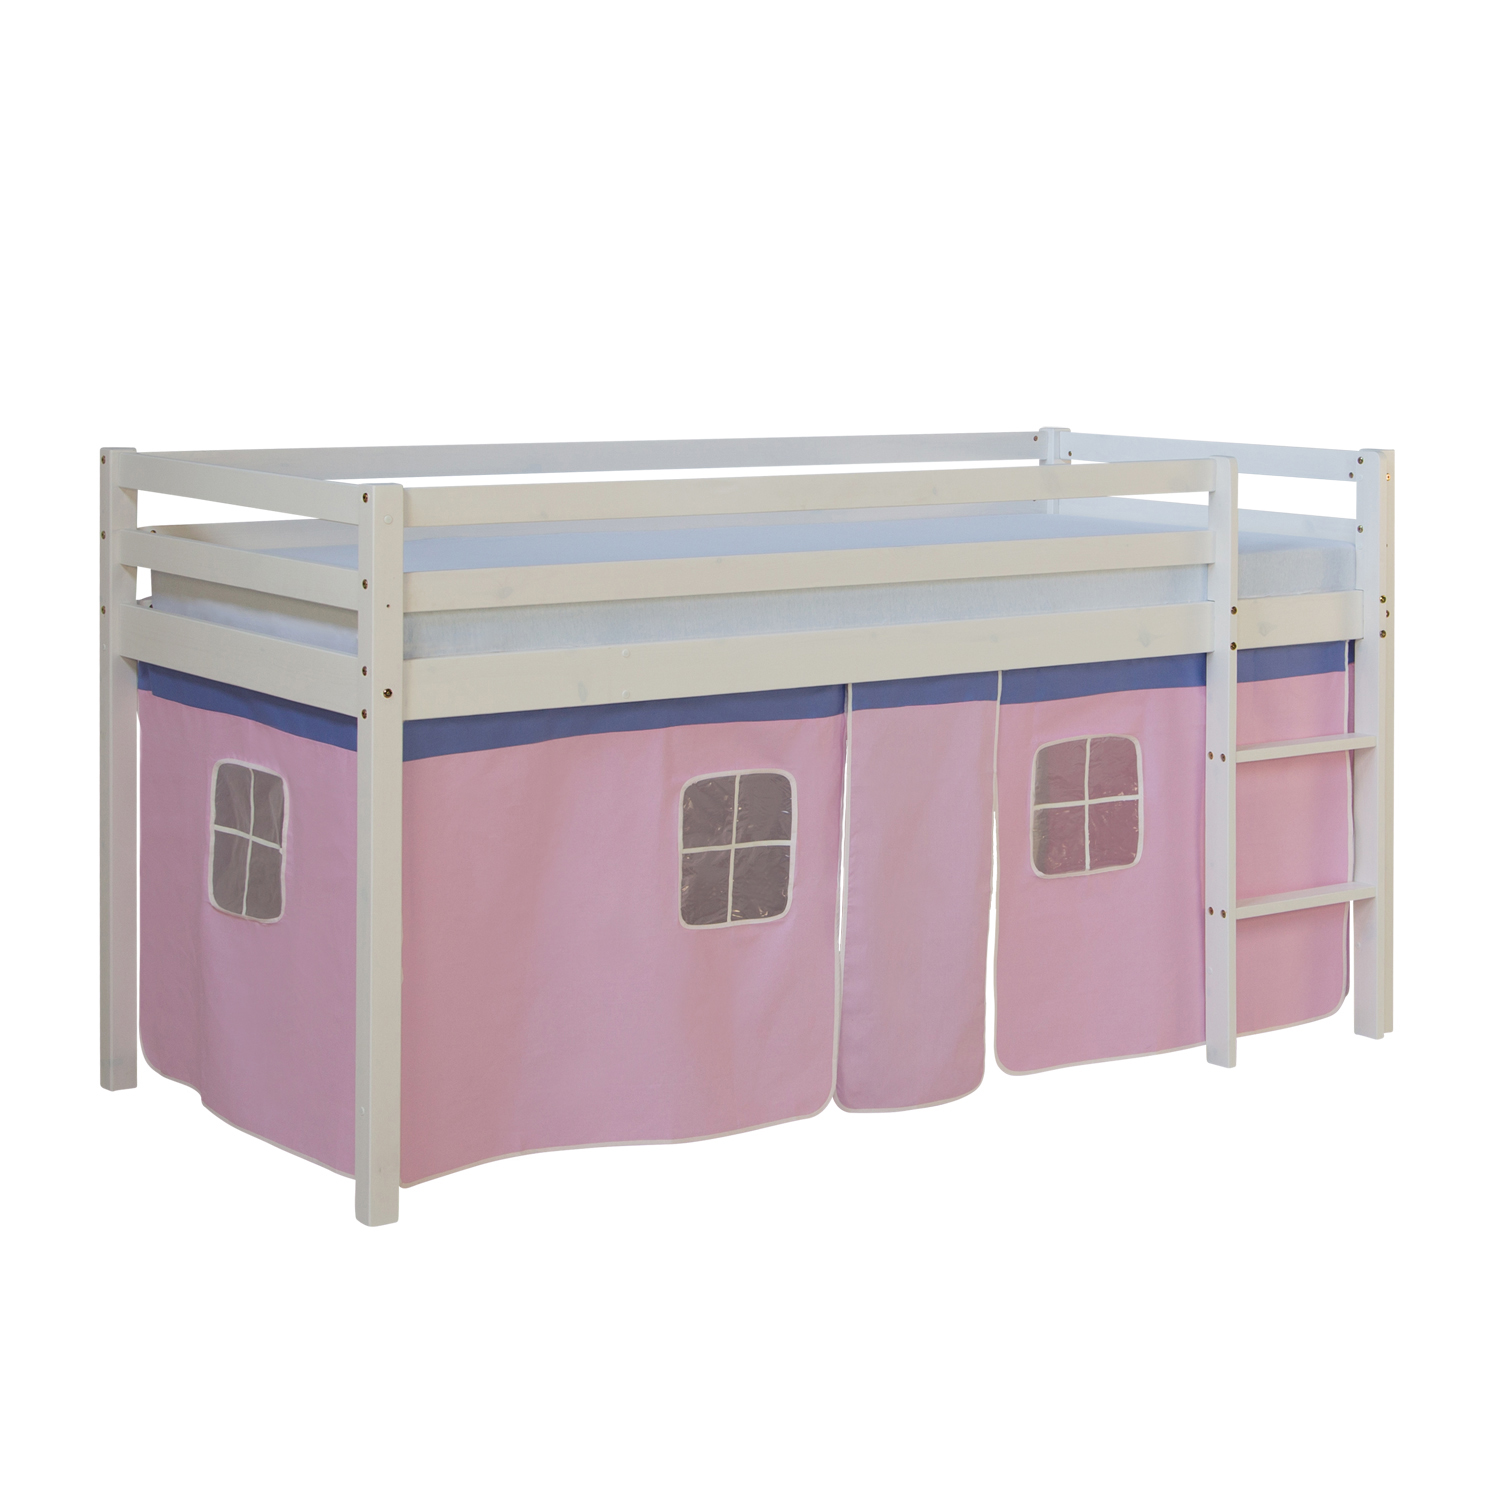 Loftbed 90x200 cm with Mattress Bunk bed Childrens bed Solid Pine Wood Slats Curtain Pink